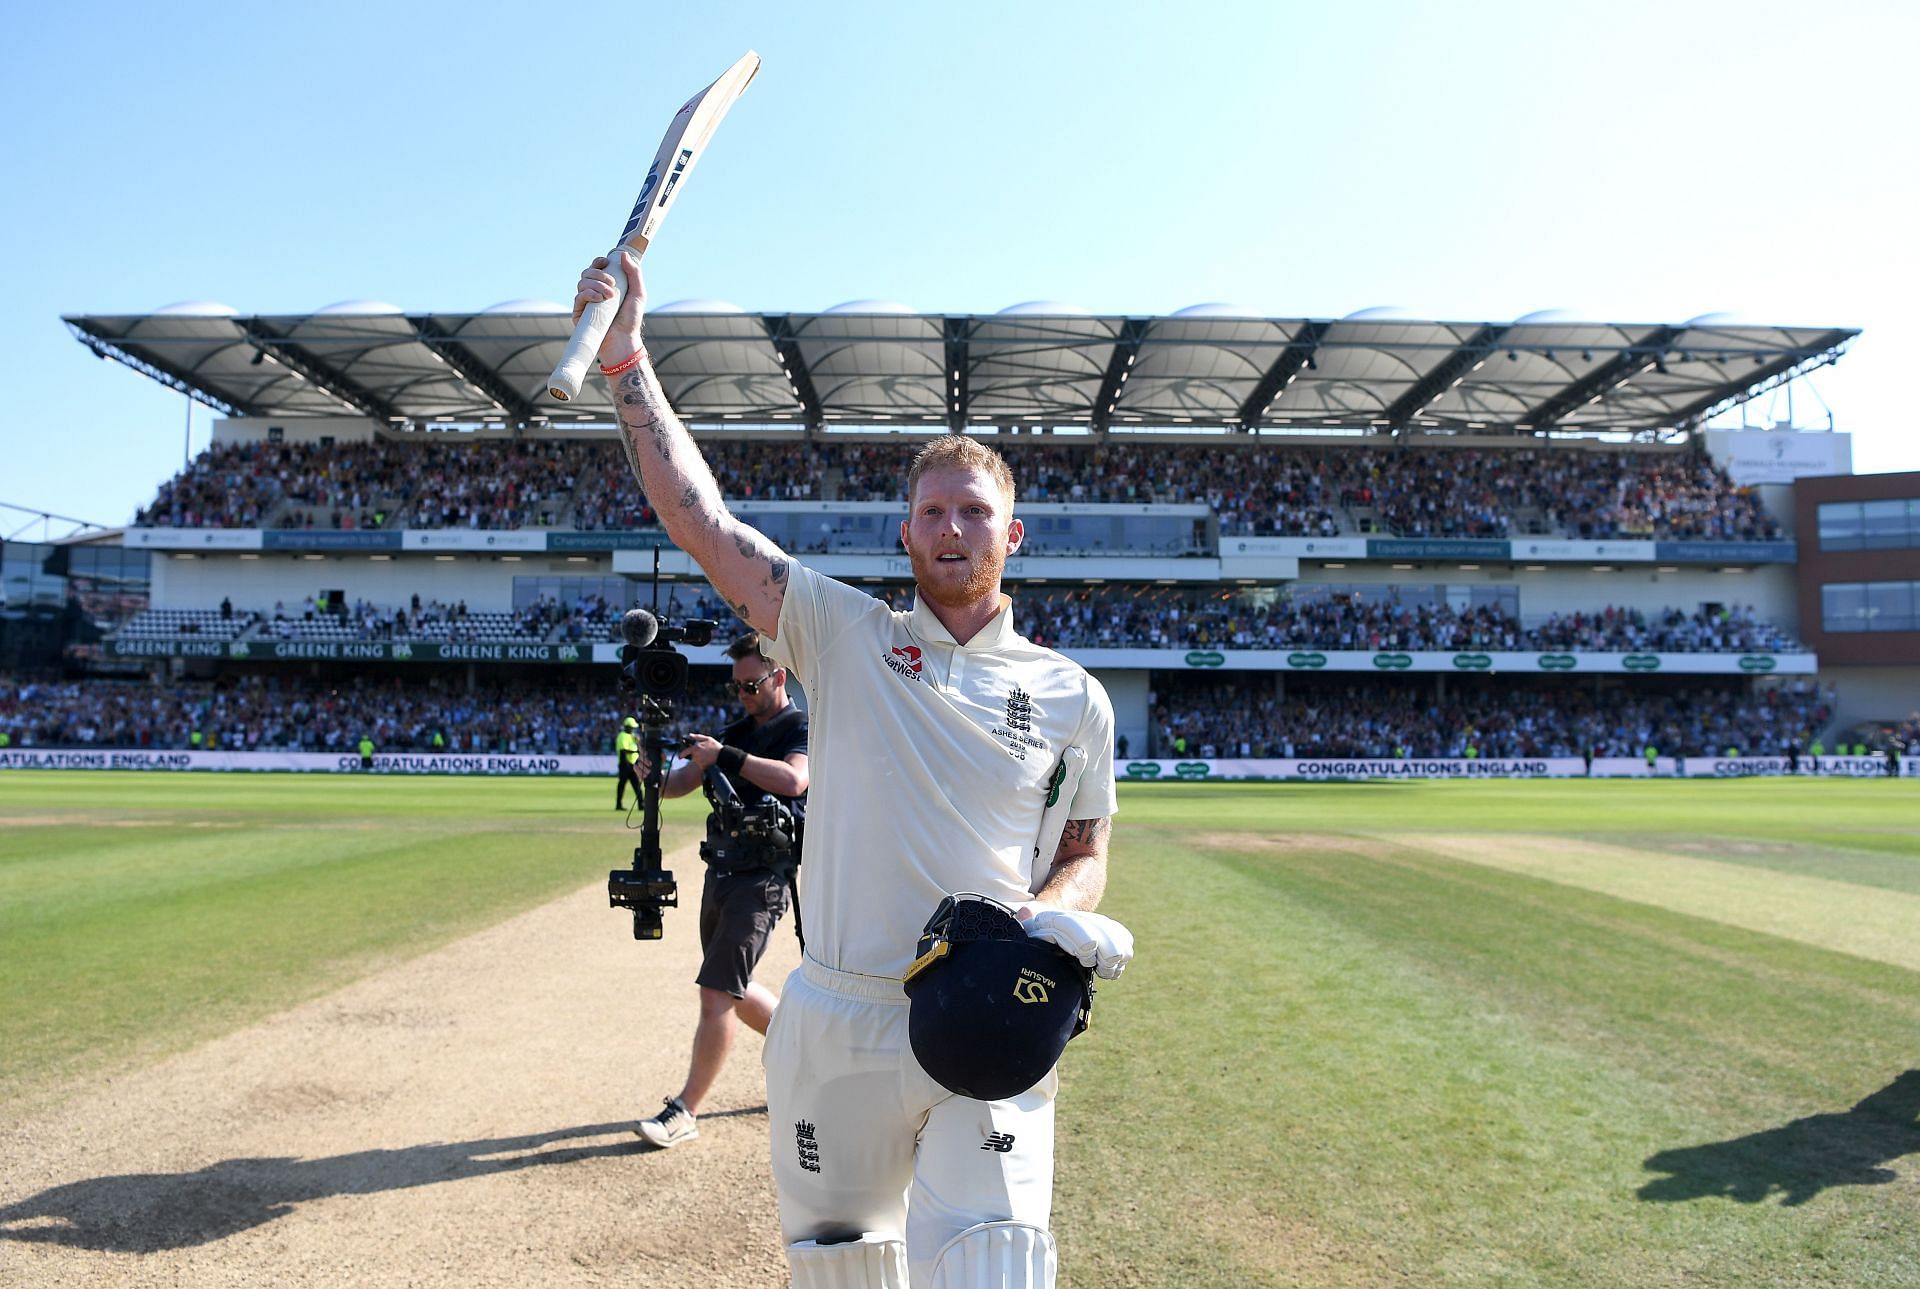 Ben Stokes took a break from cricket for mental wellbeing